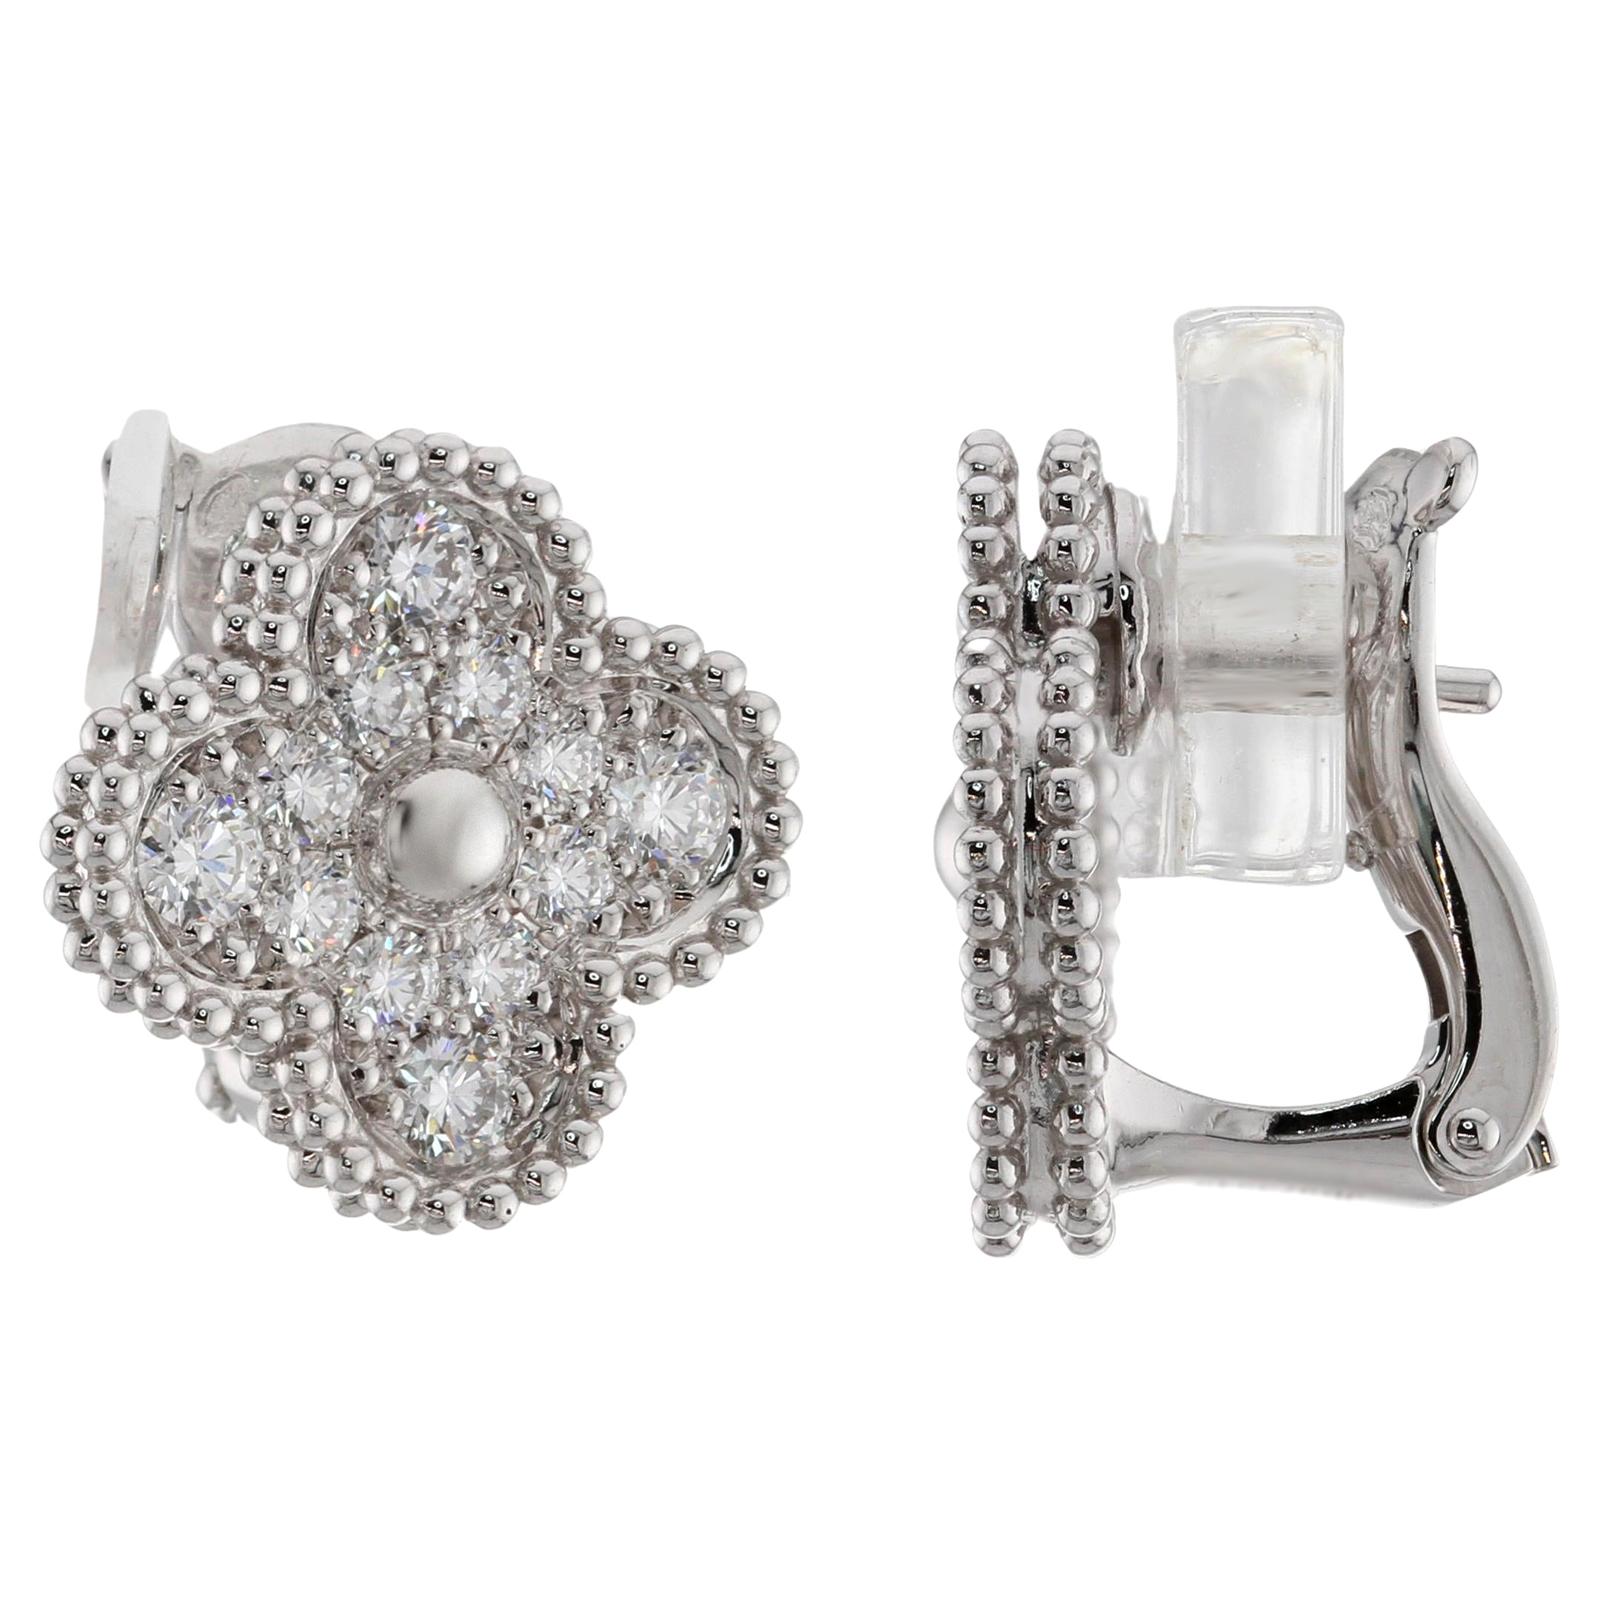 These stunning Van Cleef & Arpels earrings from the Vintage Alhambra collection feature the lucky clover design crafted in 18k white gold and with set with round brilliant D-E-F VVS1-VVS2 diamonds weighing an estimated 0.96 carats. Made in France